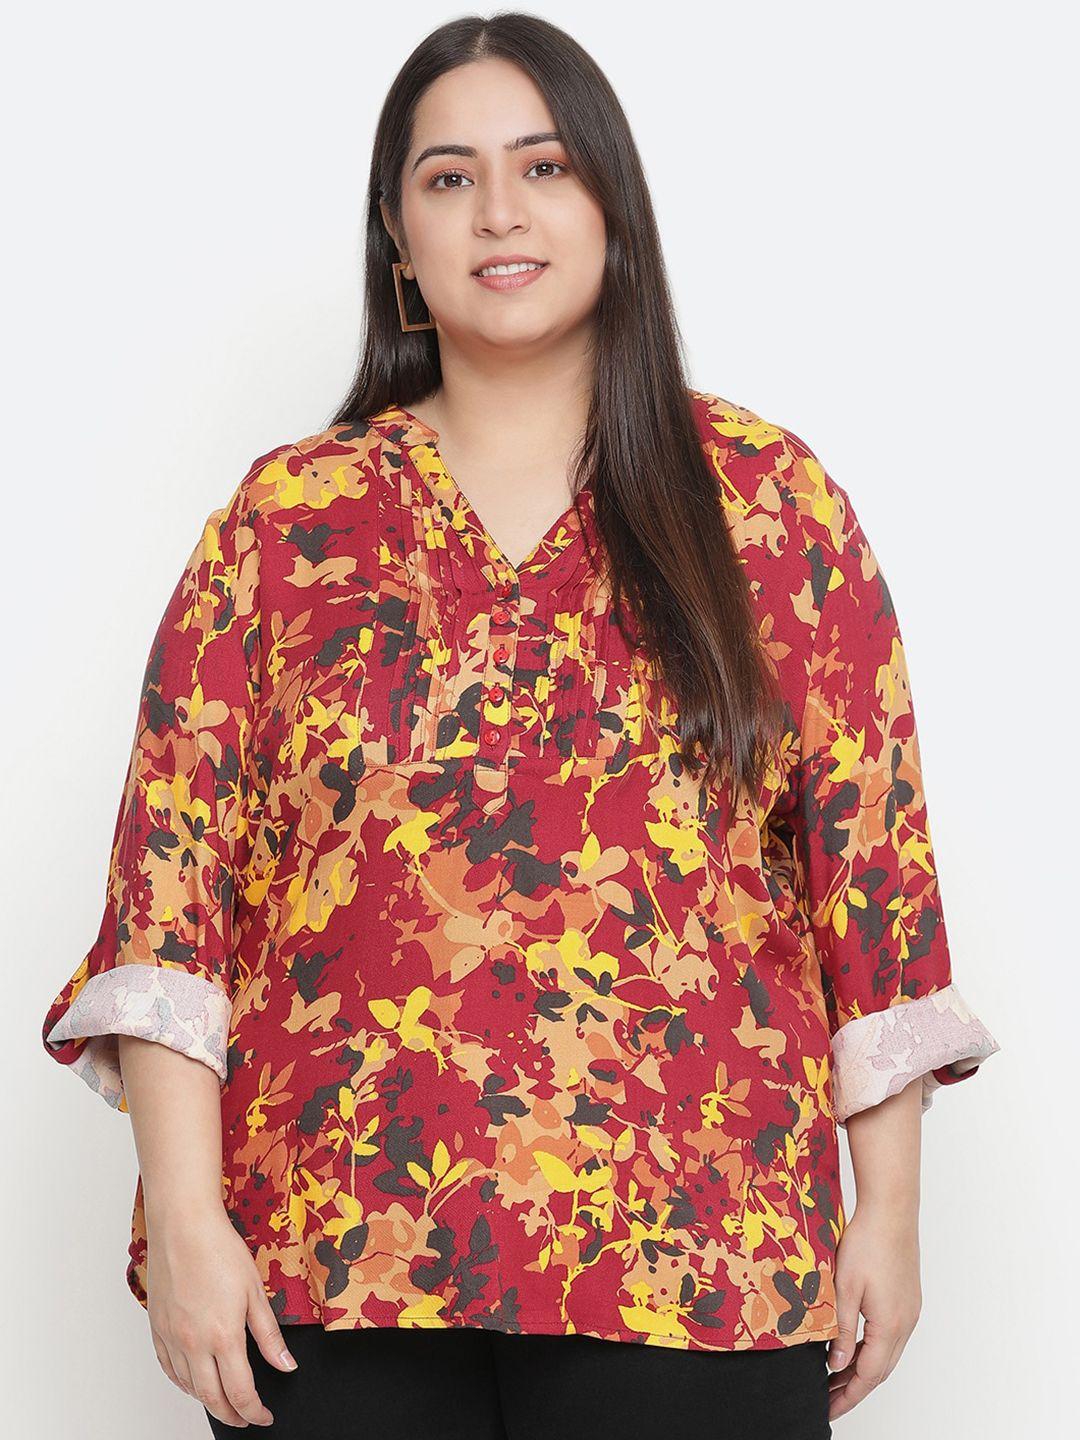 oxolloxo red floral print roll-up sleeves crepe plus size top